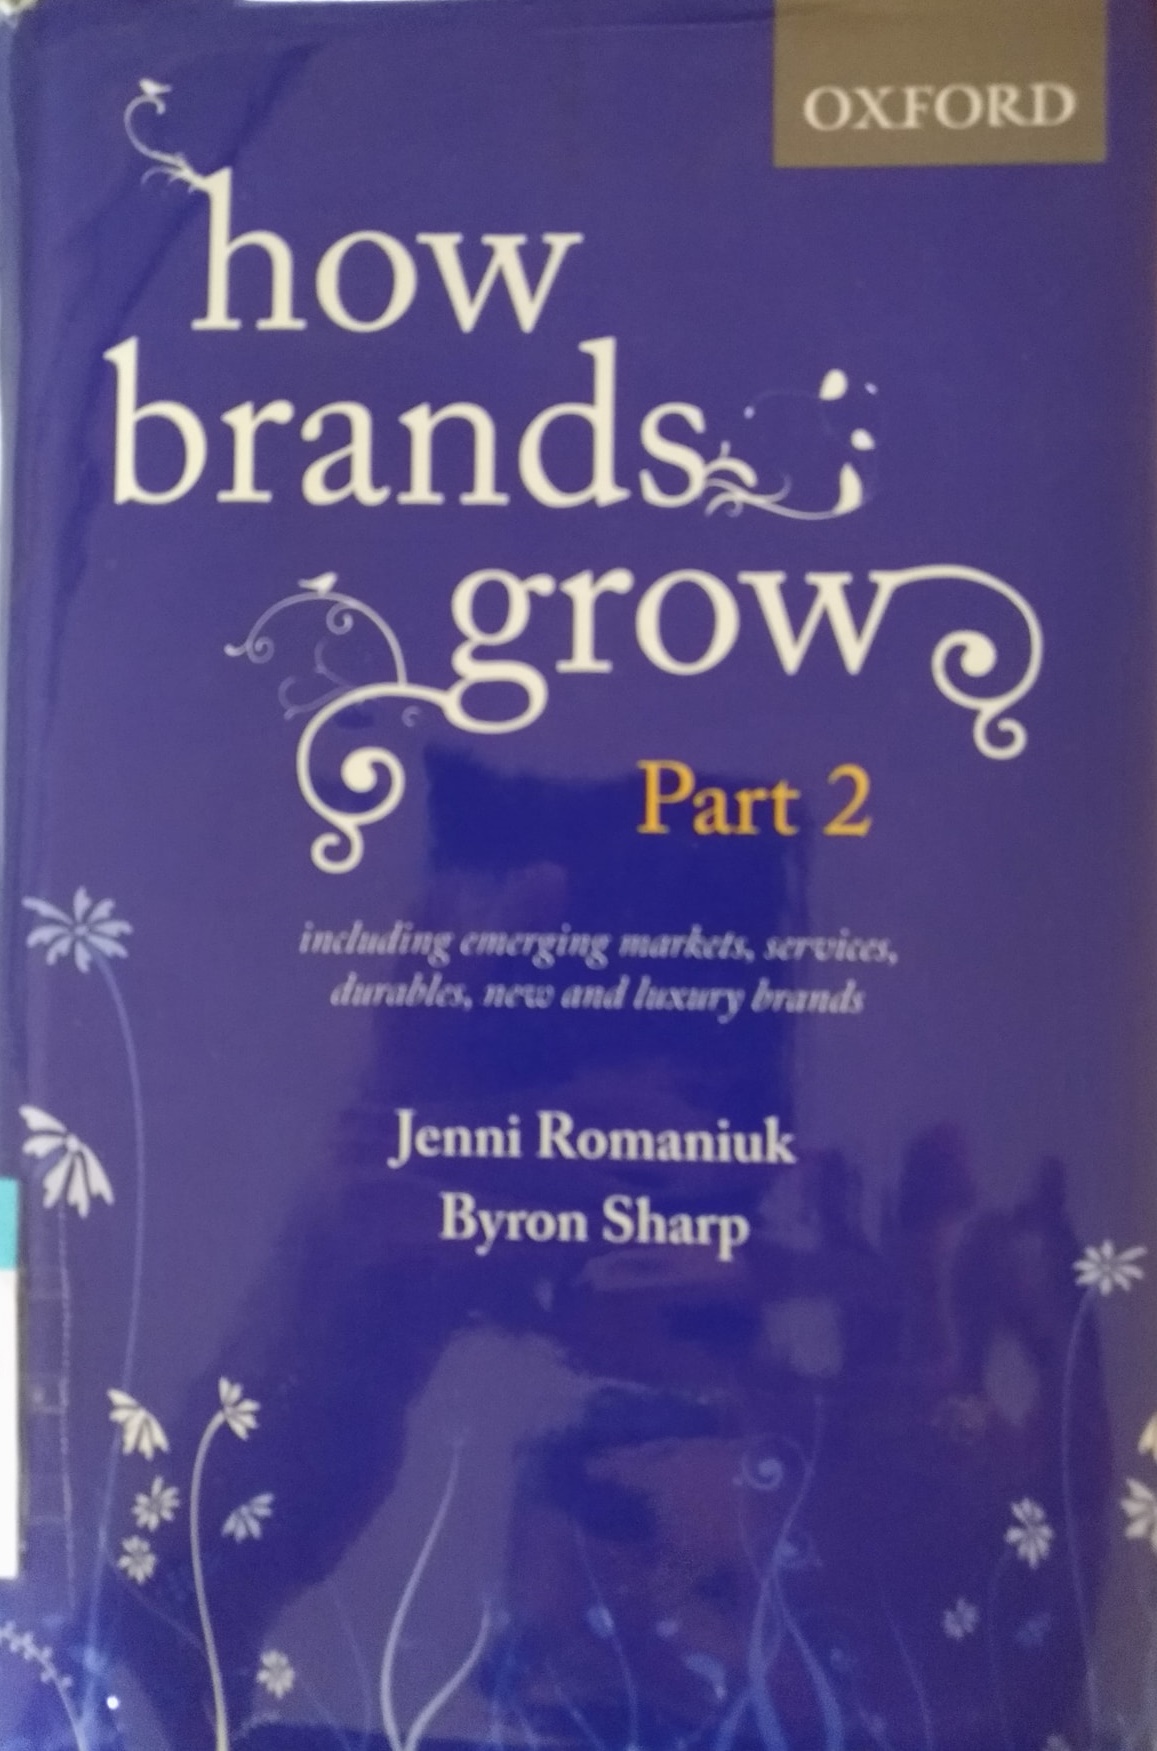 Cover of How brands grow. Part 2, Including emerging markets, services and durables, new brands and luxury brands